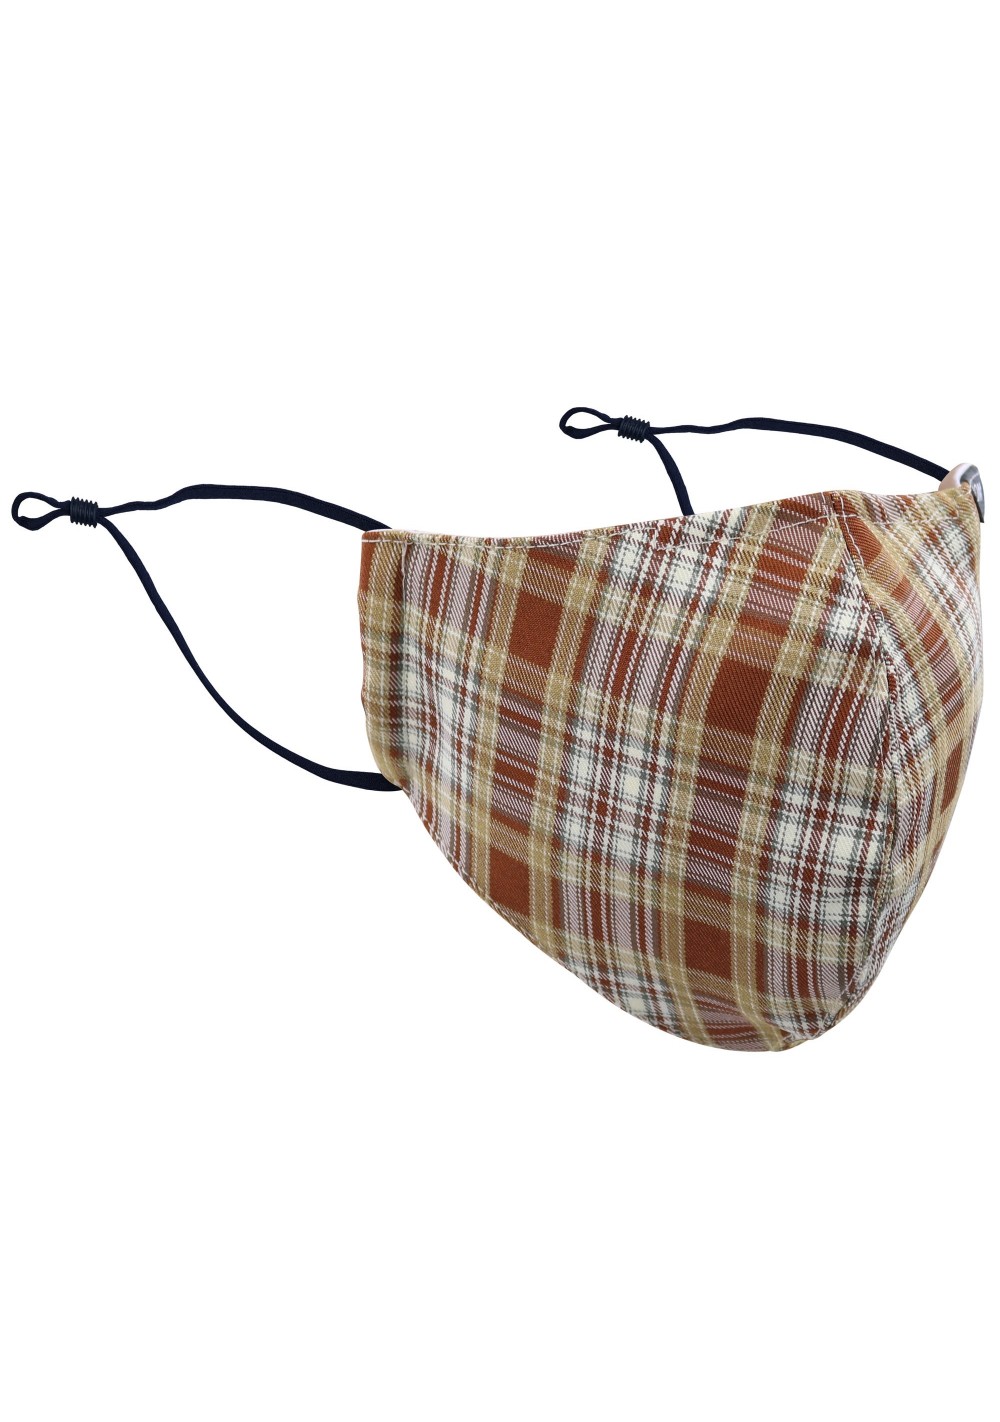 fall-mask-collection-filter-face-mask-in-navy-brown-and-beige-check-design-bows-n-ties